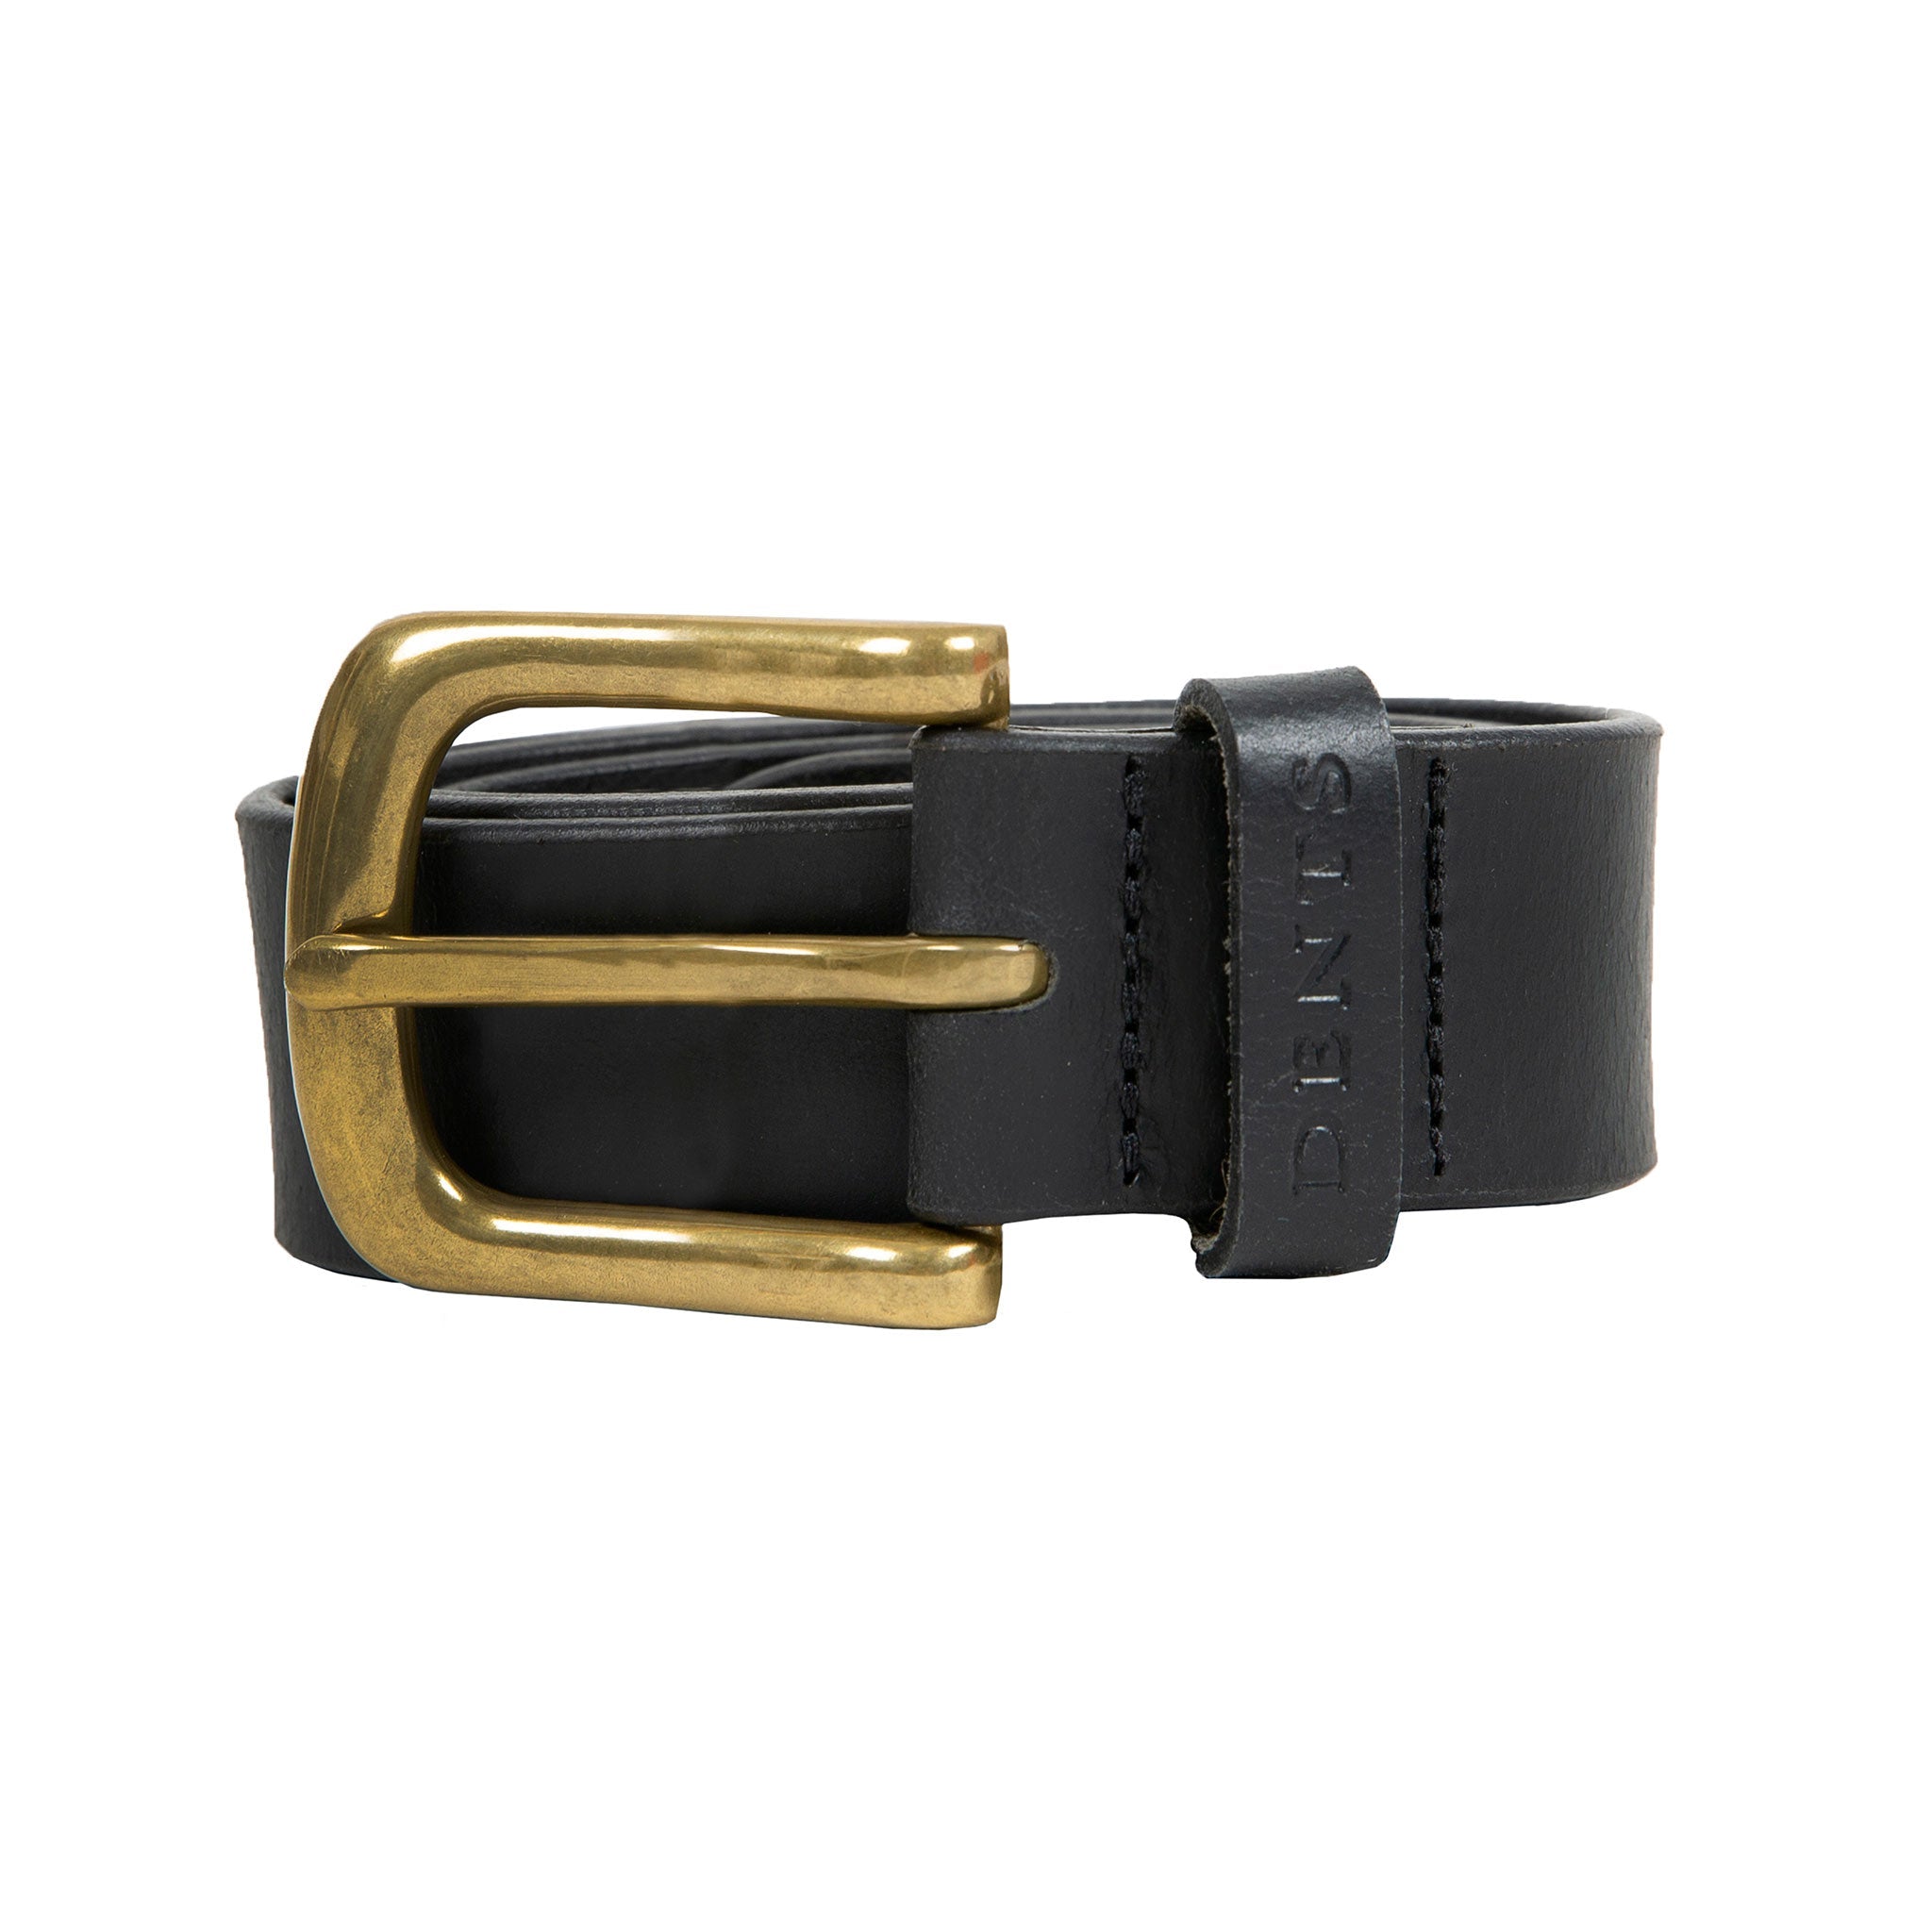 Black leather belt with solid brass buckle. 30mm wide 100% real